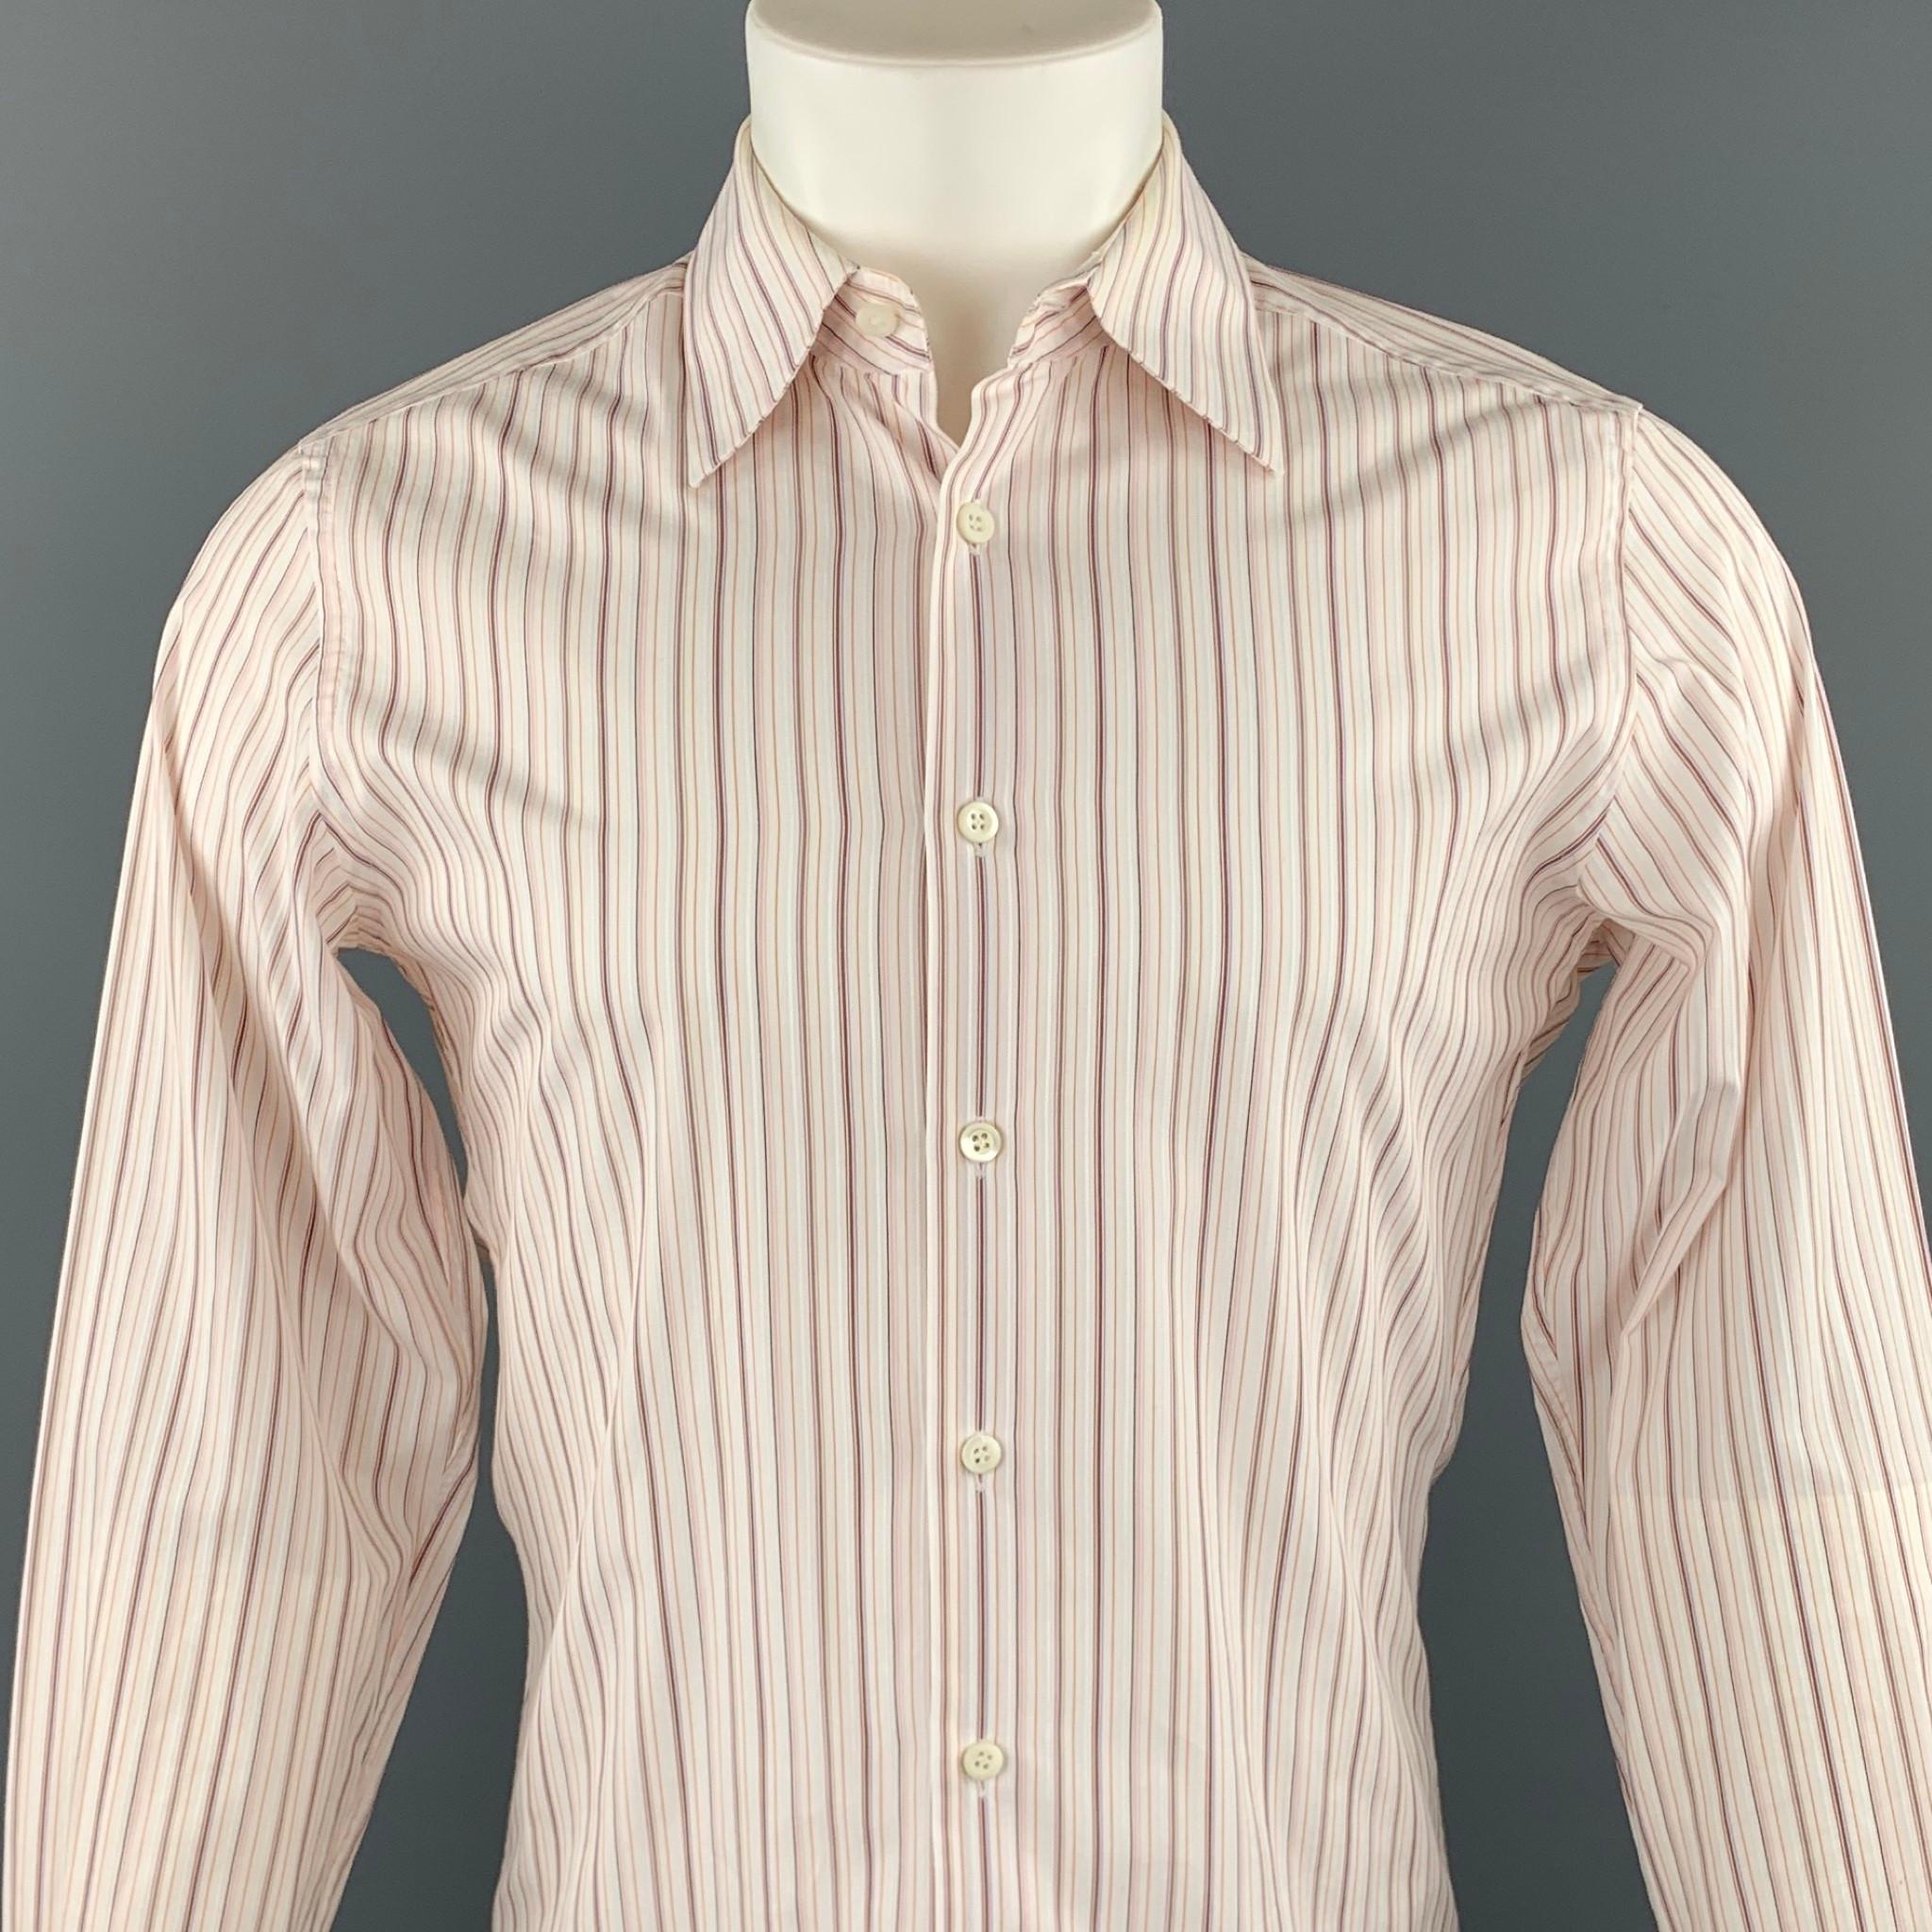 PRADA long sleeve shirt comes in a white stripe cotton featuring a button up style and a spread collar. Minor discoloration on collar. Made in Italy.

Good Pre-Owned Condition.
Marked: 40/15.5

Measurements:

Shoulder: 16 in. 
Chest: 40 in. 
Sleeve: